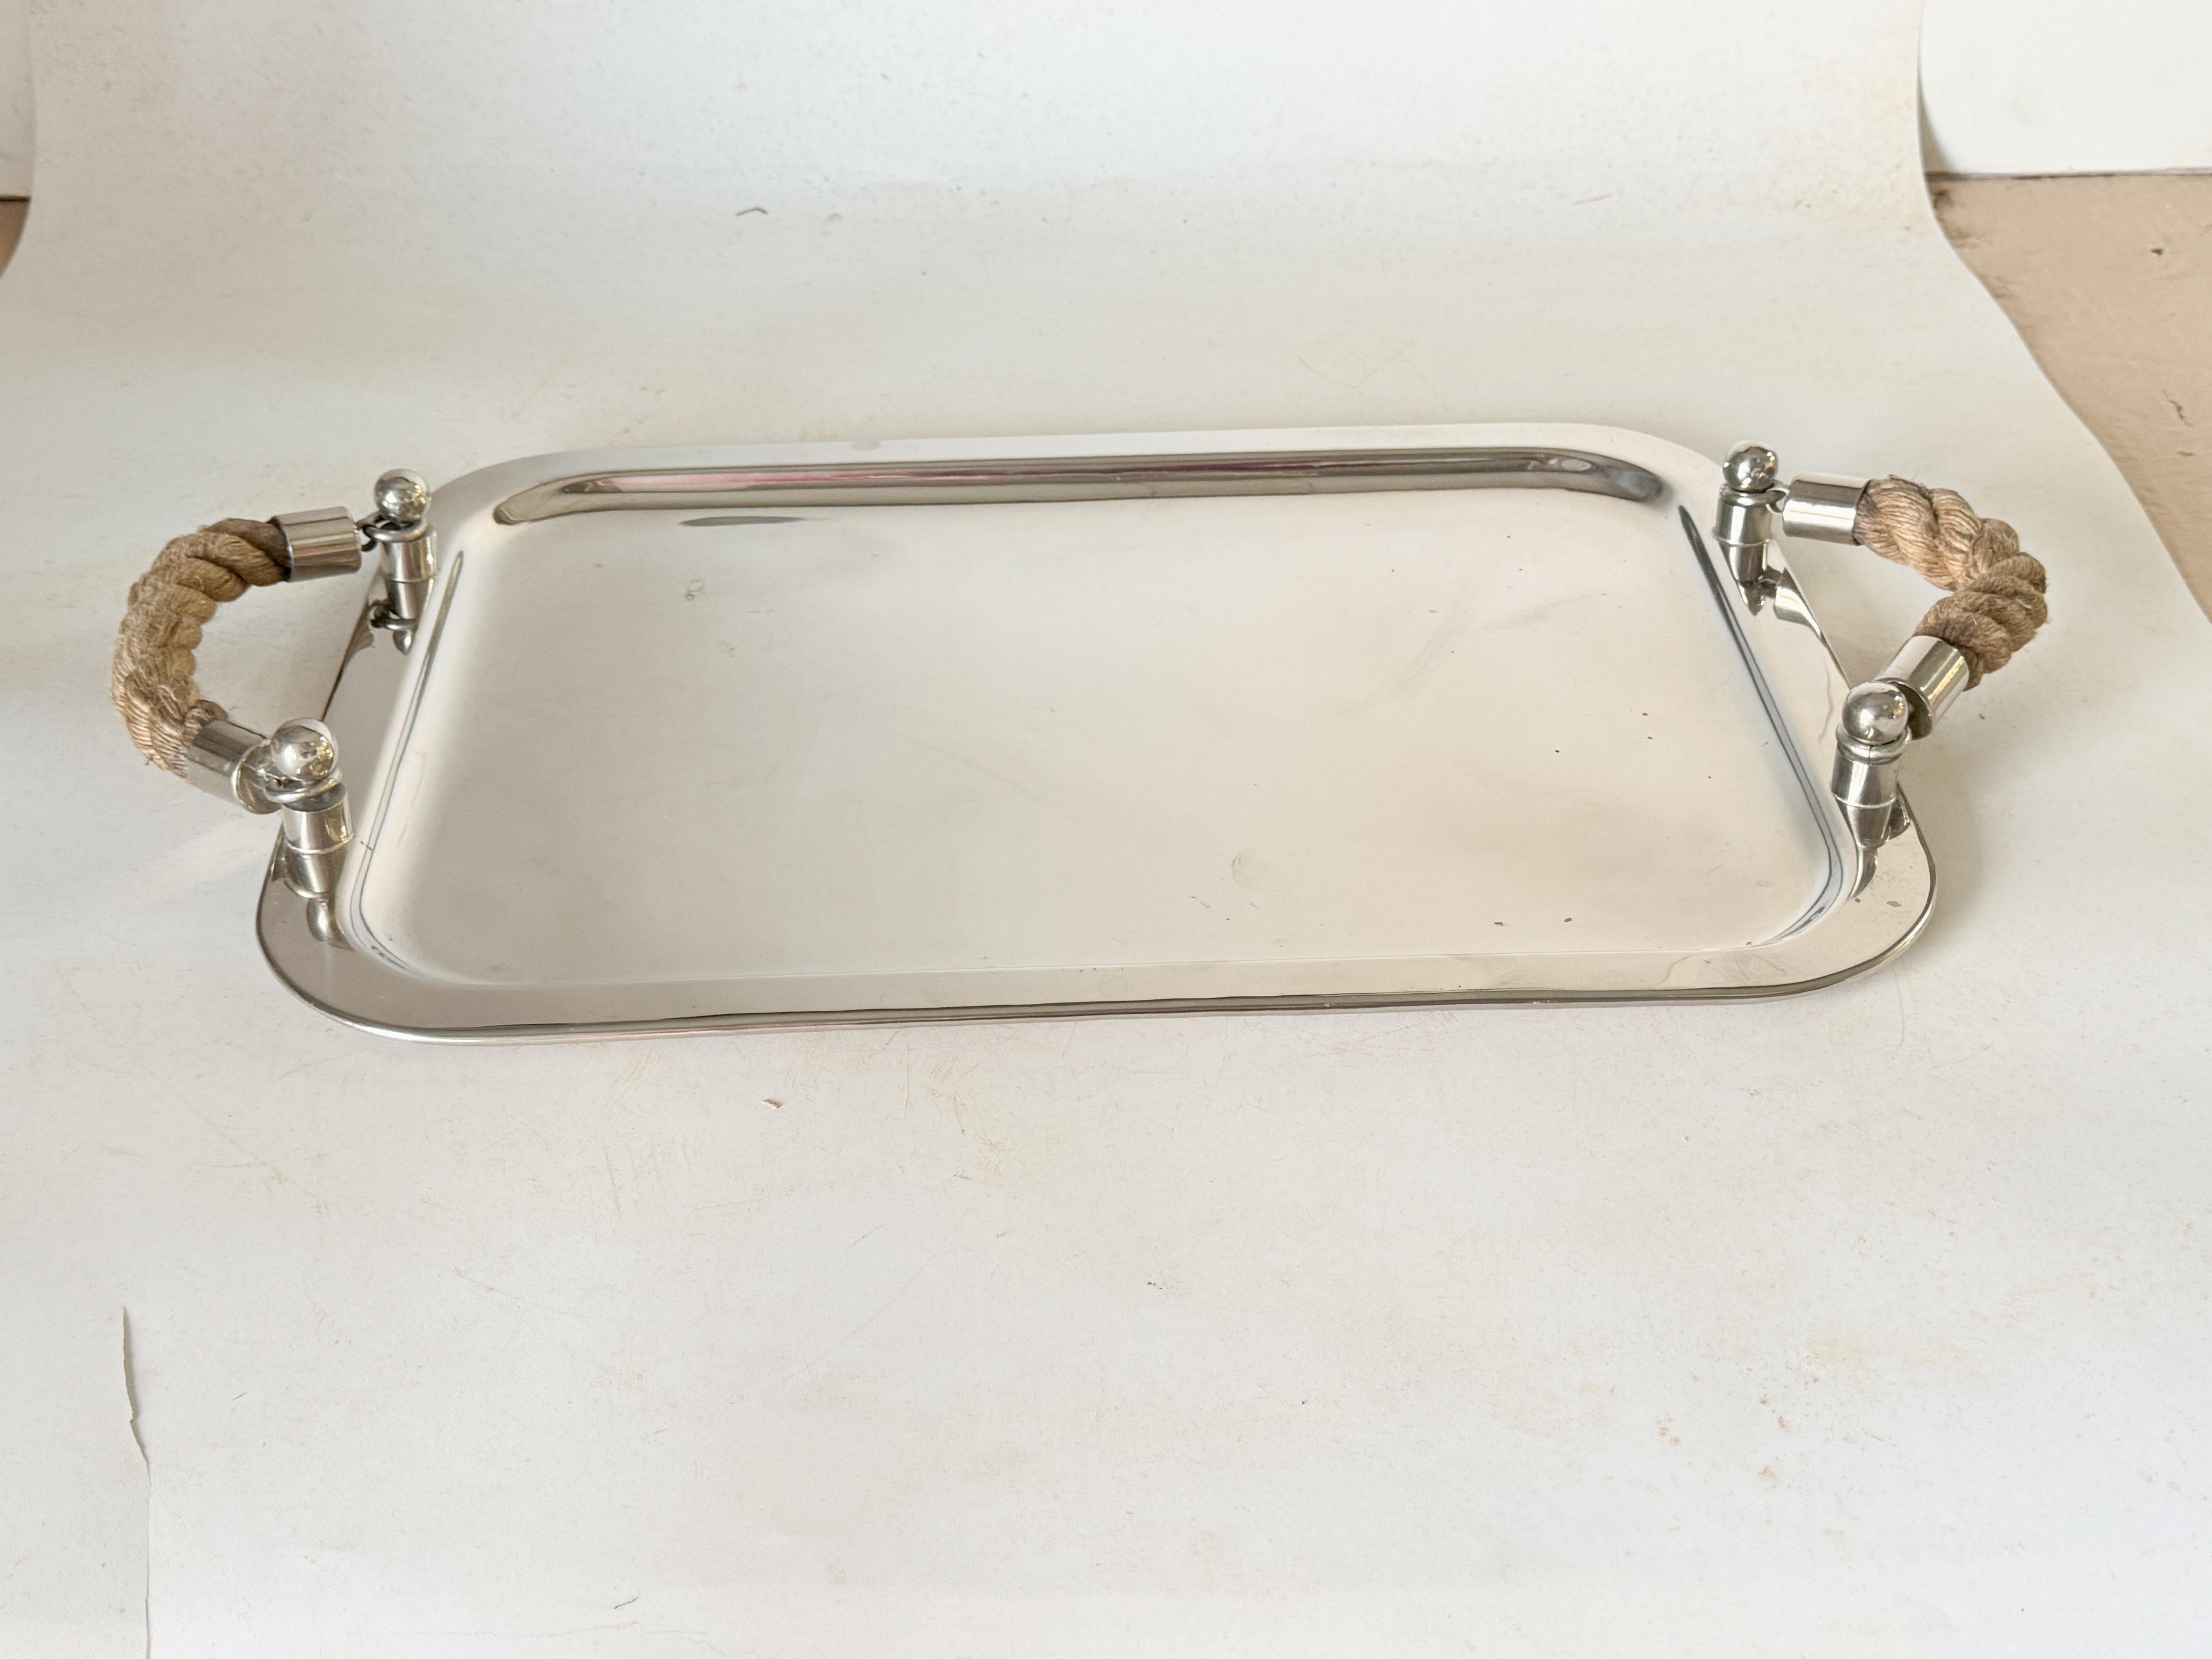 Yachting Serving Tray With Rope Handles High Quality Chrome Silver Color 1970 In Good Condition For Sale In Auribeau sur Siagne, FR